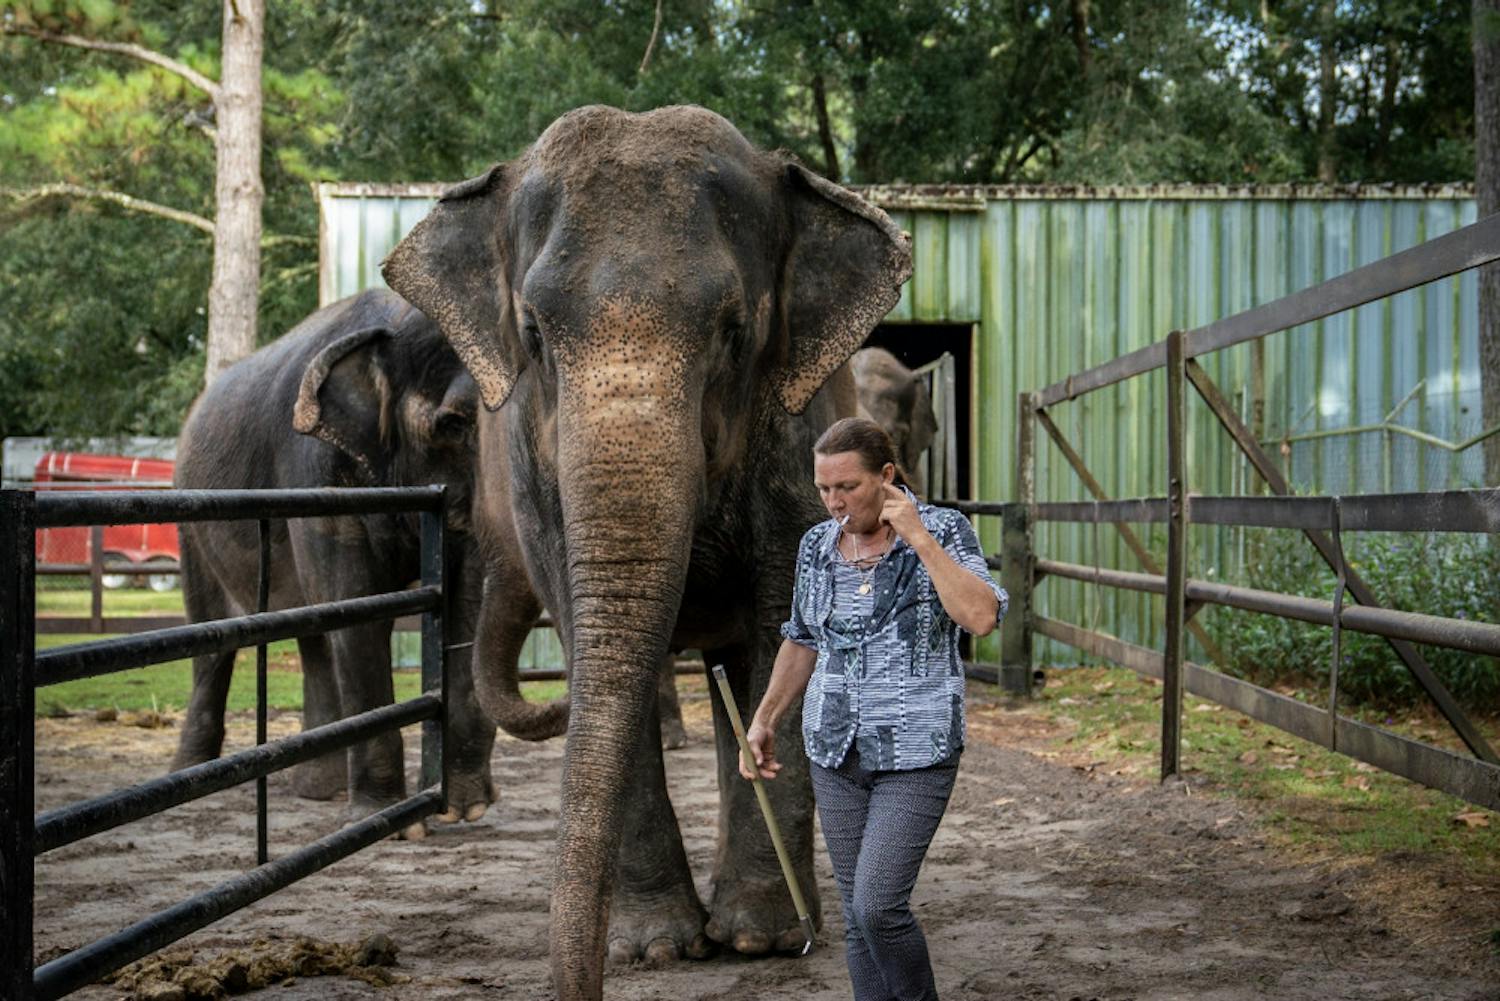 Patricia Zerbini, 54, the proprietor of Two Tails Ranch, guides several of her elephants to a paddock where she then answered questions about the animals. Elephant Appreciation Days were held at the ranch on Saturday and Sunday in order to raise awareness of elephant welfare efforts, as well as fundraising for their care. 